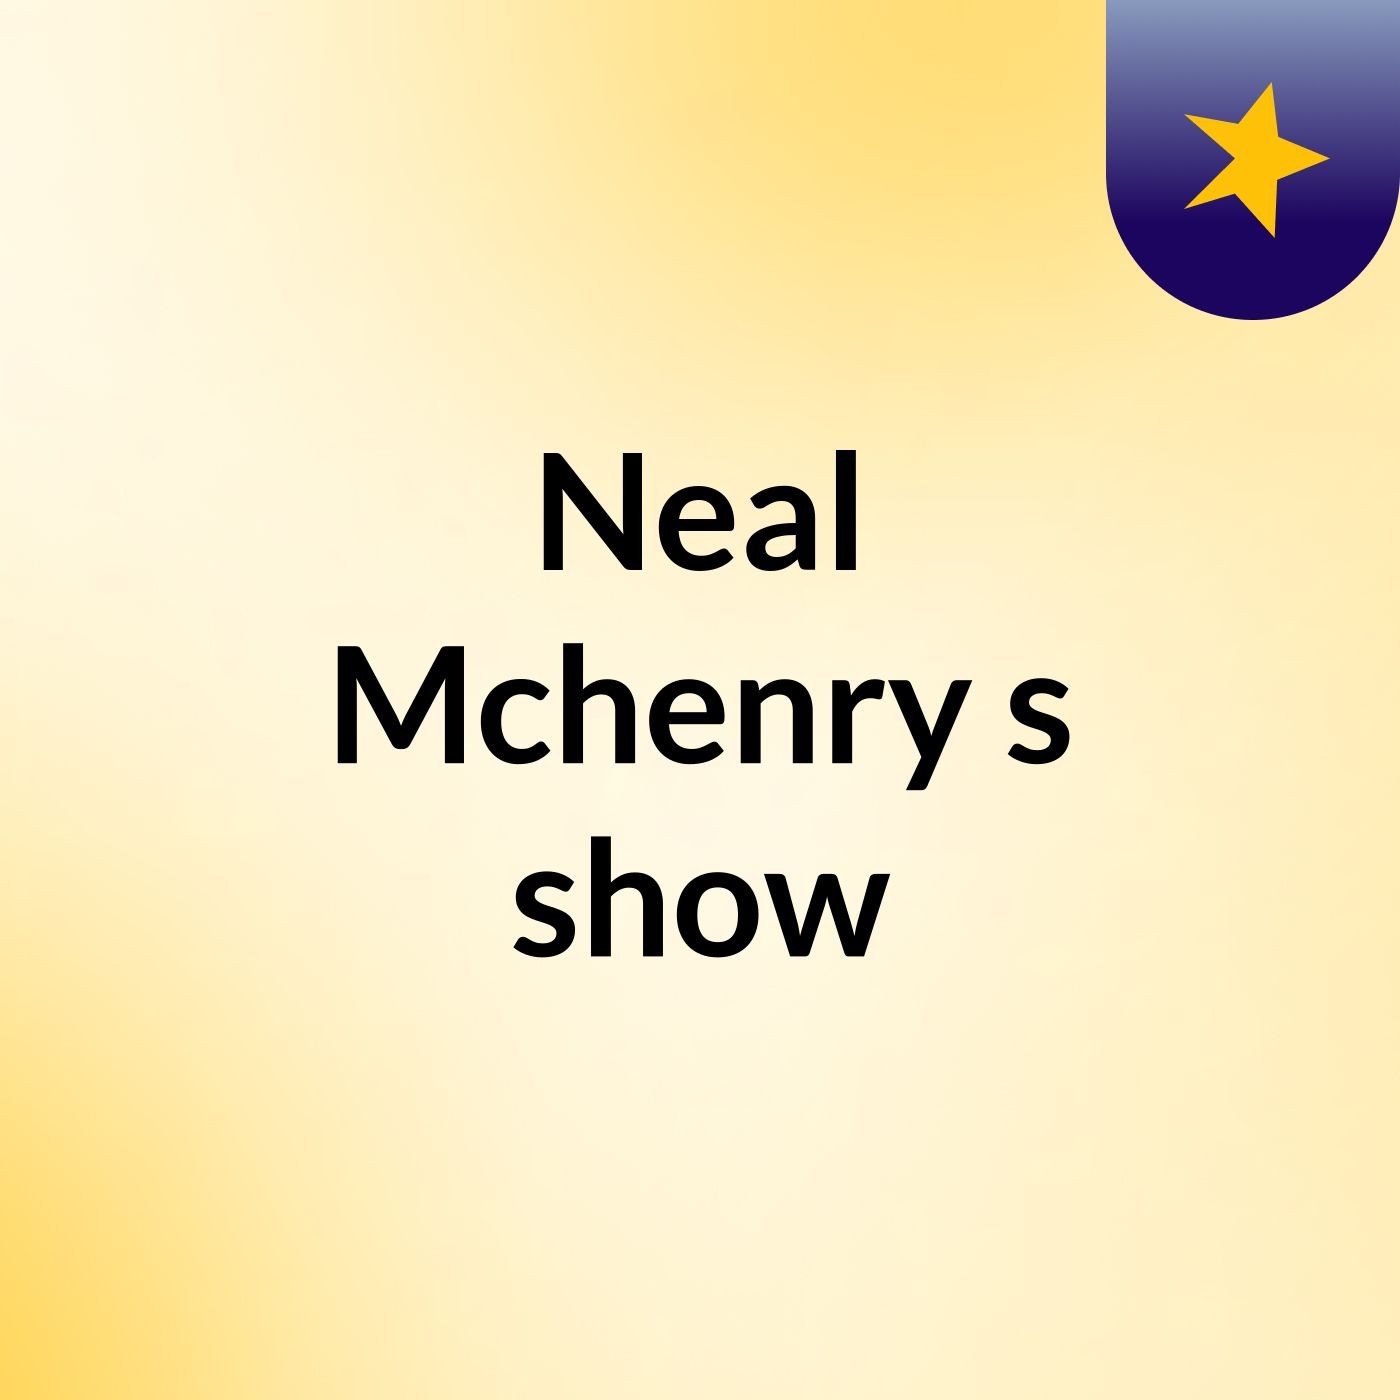 Neal Mchenry's show